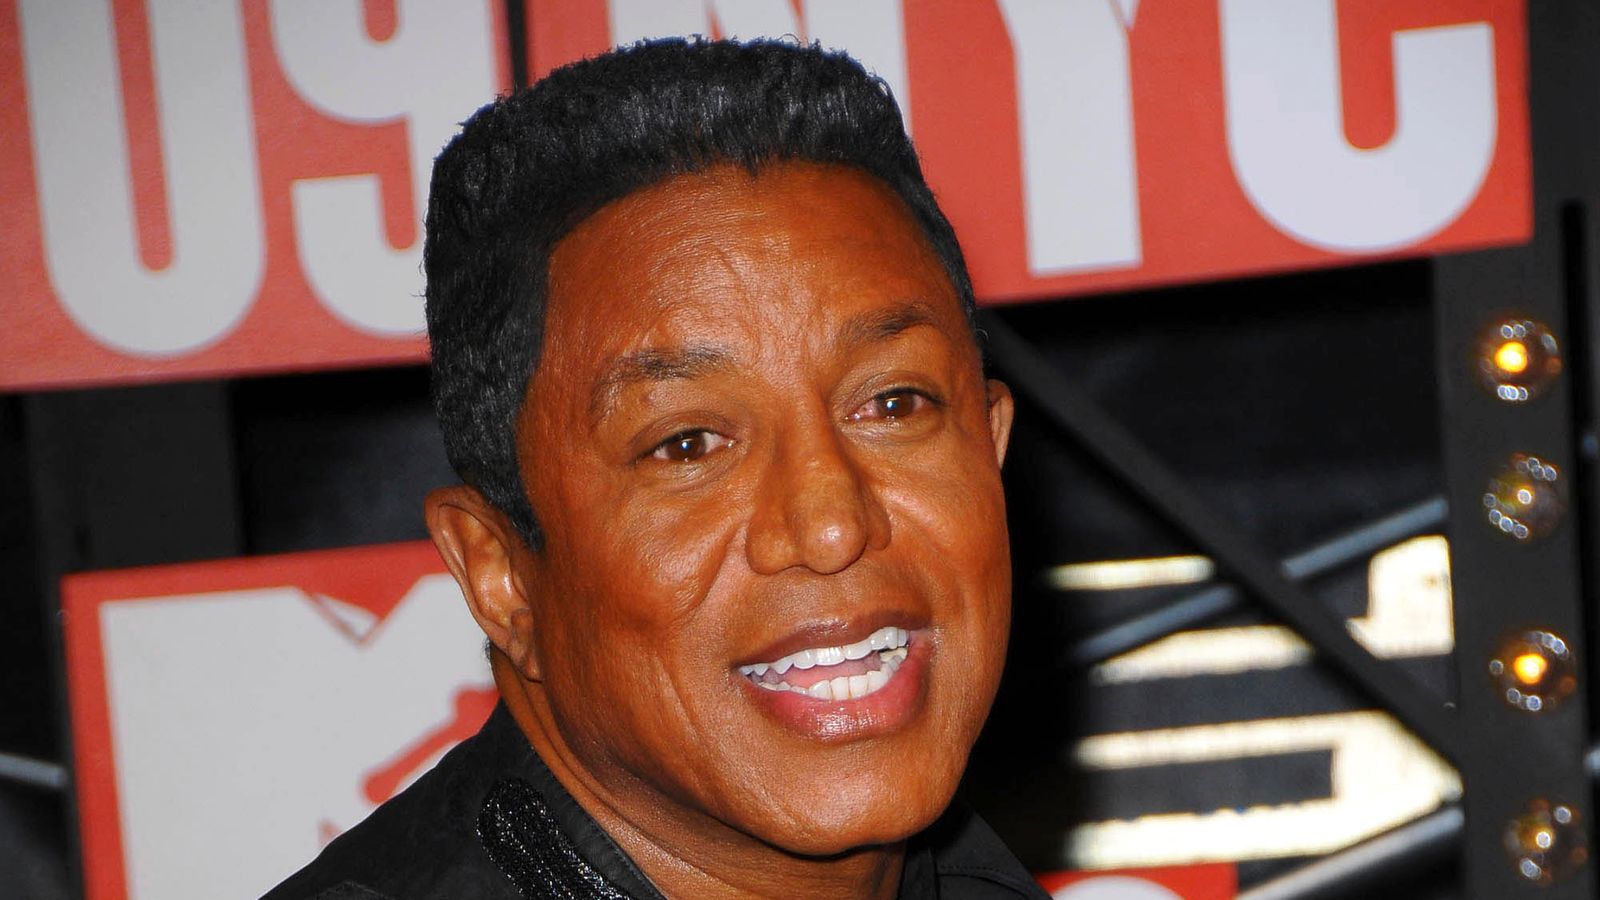 Jermaine Jackson sued over 1988 sexual assault allegation